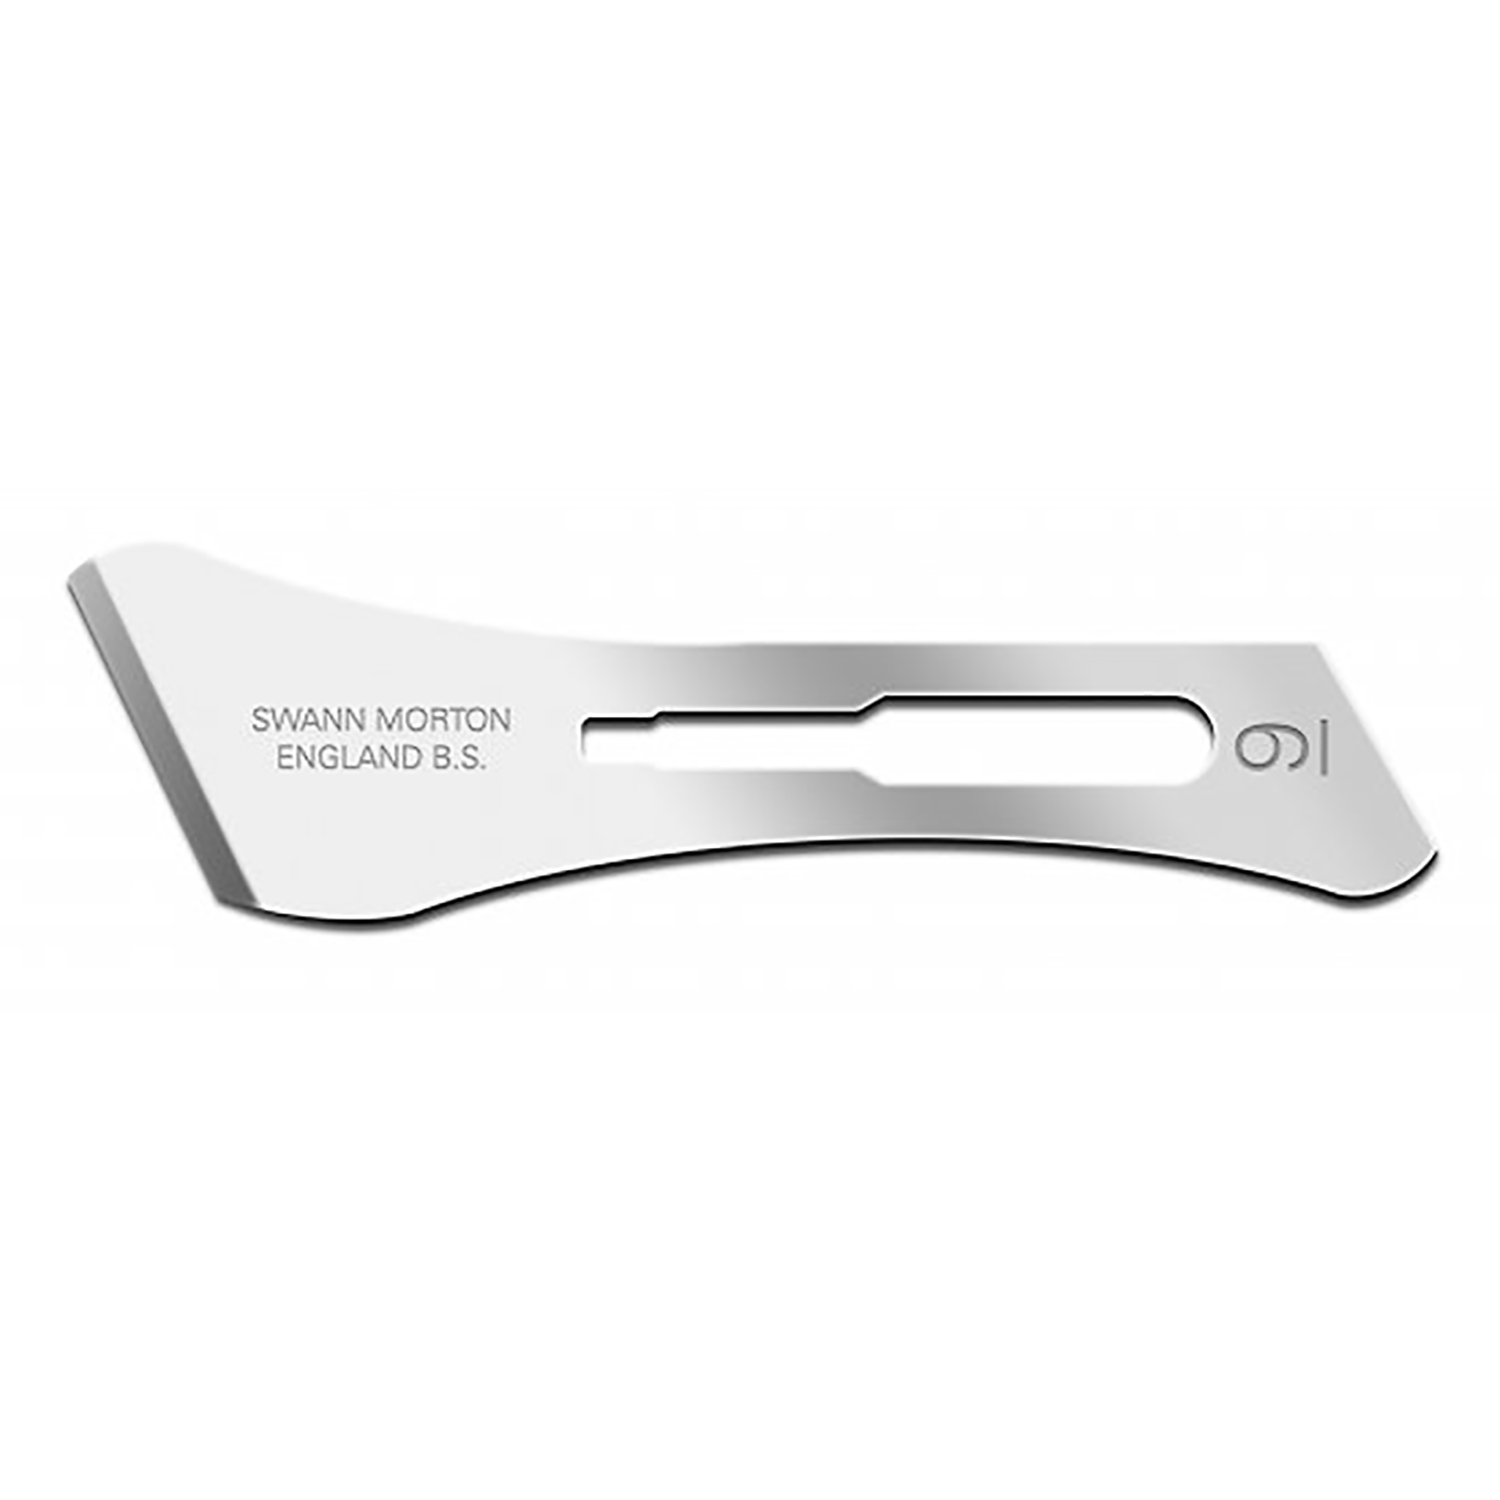 Swann Morton Carbon Steel Surgical Blades | No.9 | Non-Sterile | Pack of 100